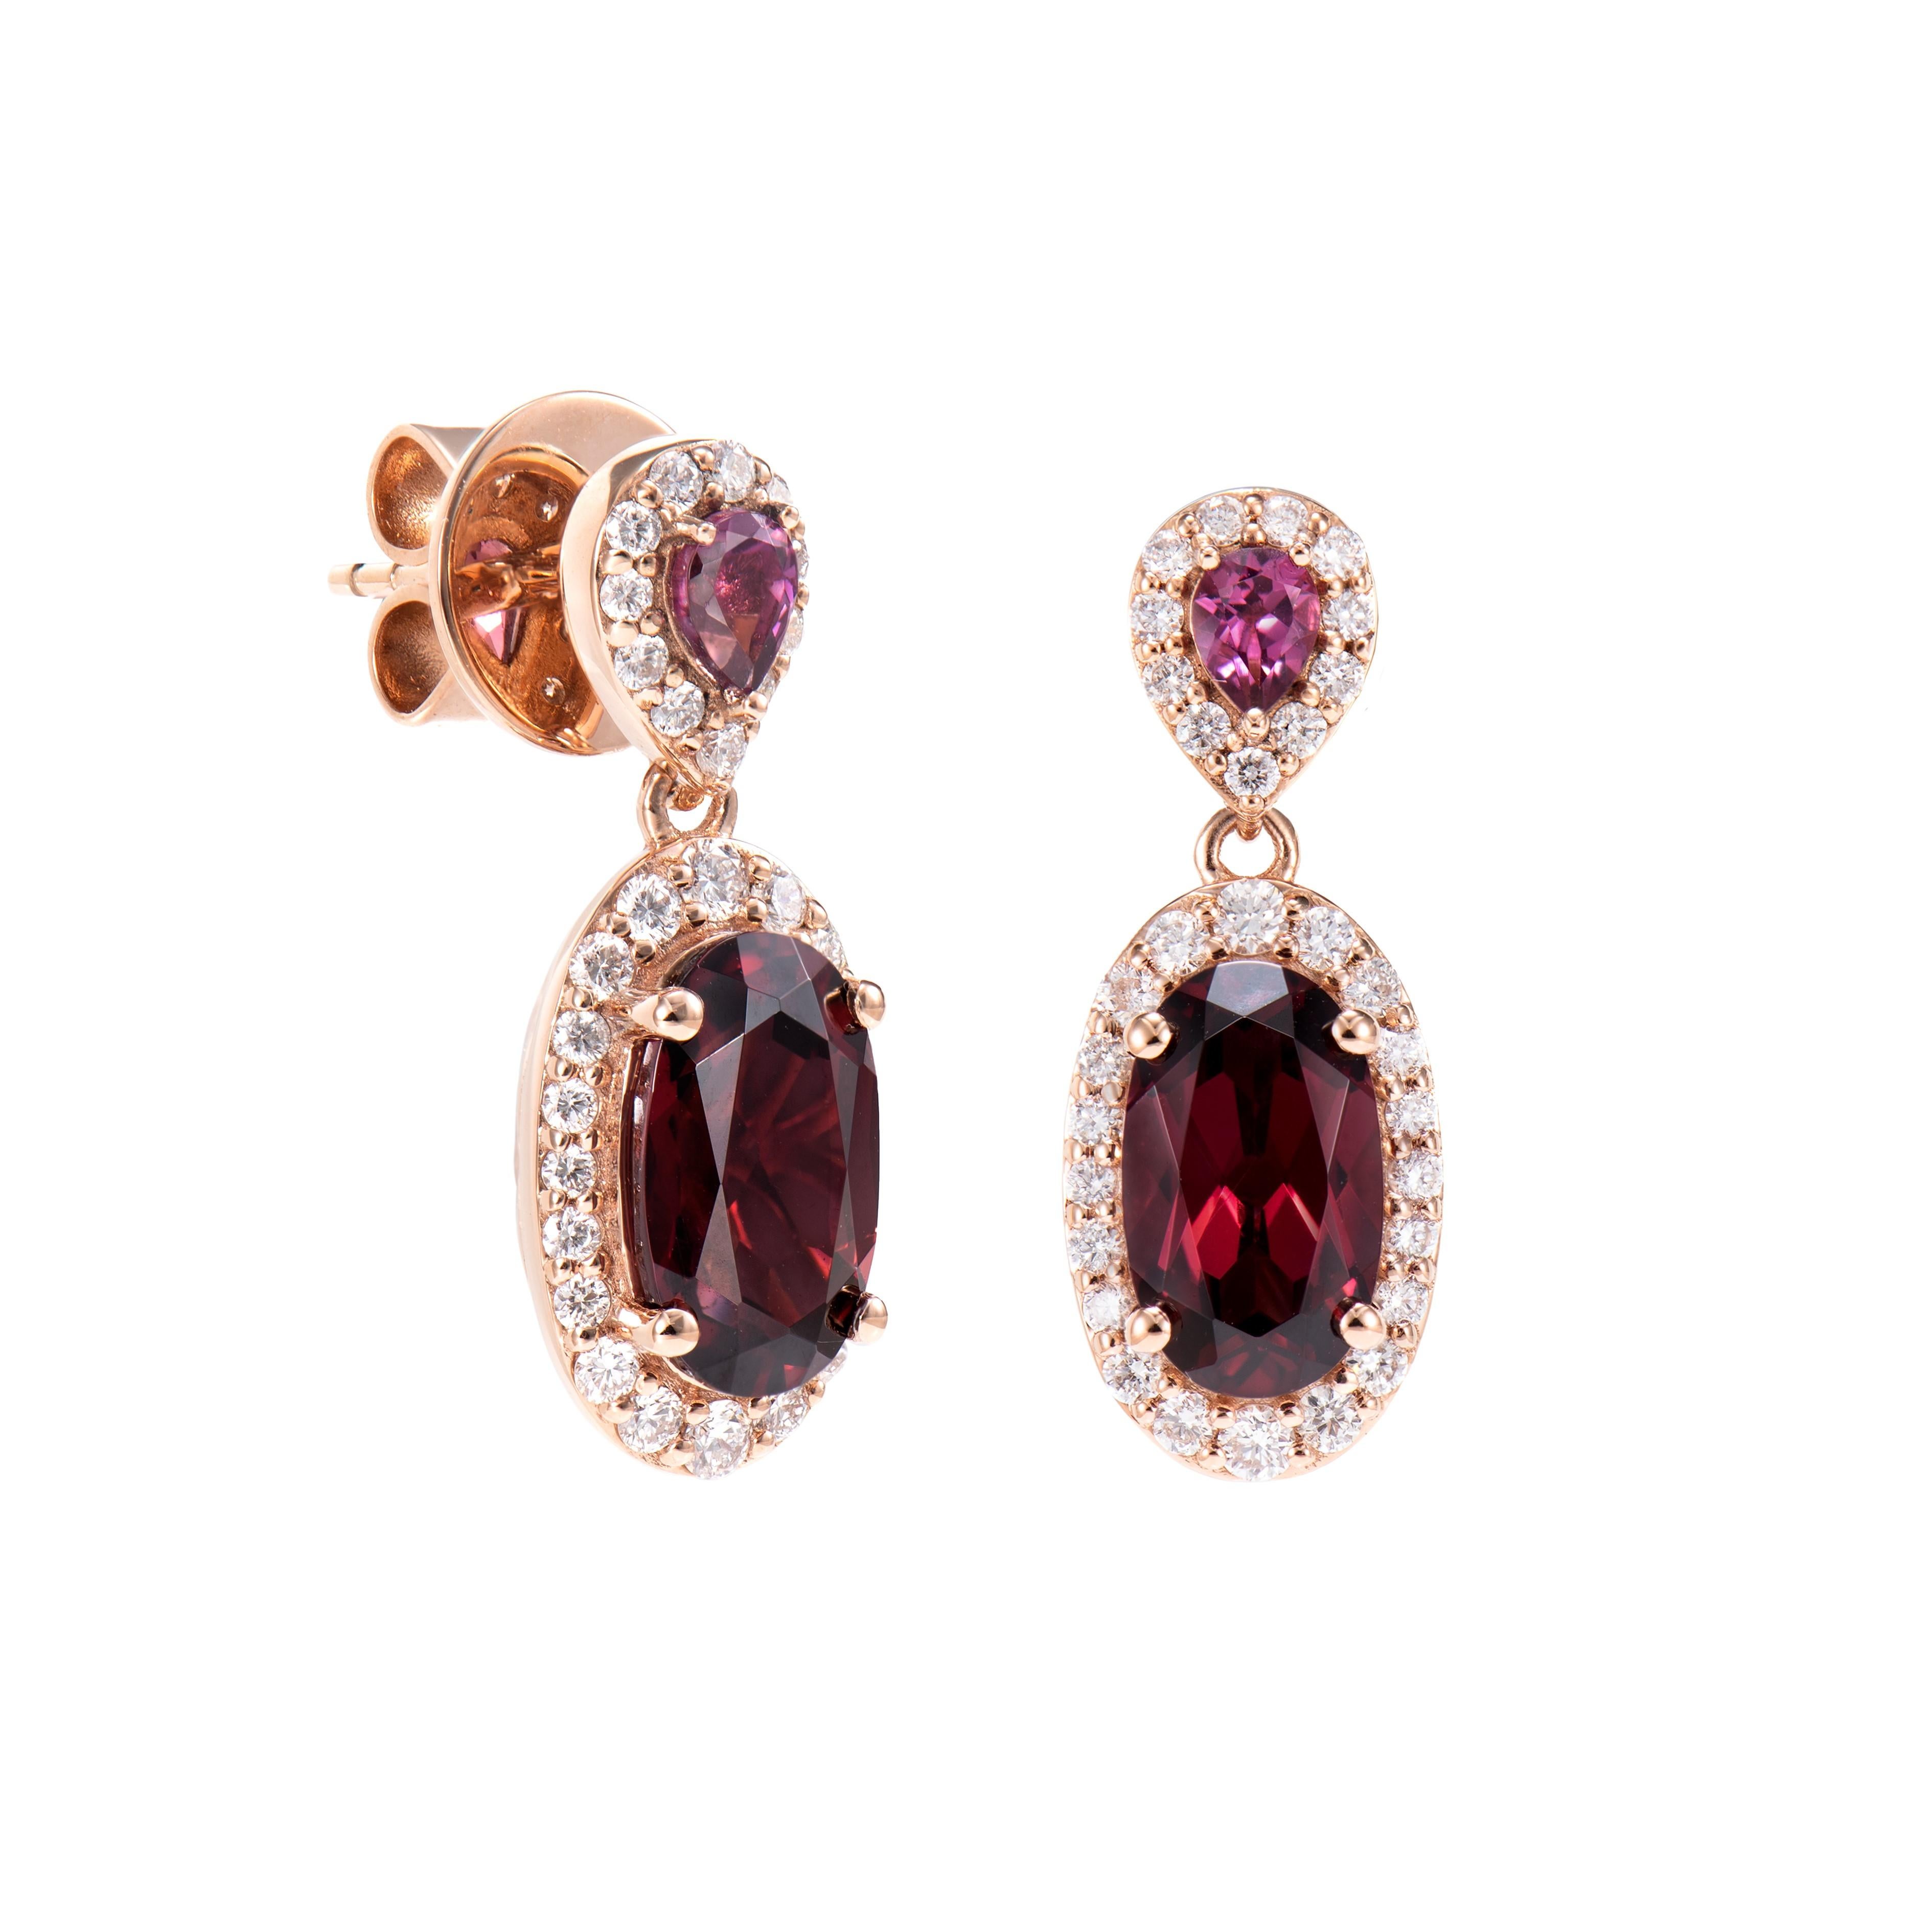 Celebrating Magenta as the color of the year for 2023, we present our exclusive Radiating Rhodolite collection. The magnificent magenta hues in these gems are brought to life in a classic rose gold setting with white diamonds.

Rhodolite Drop